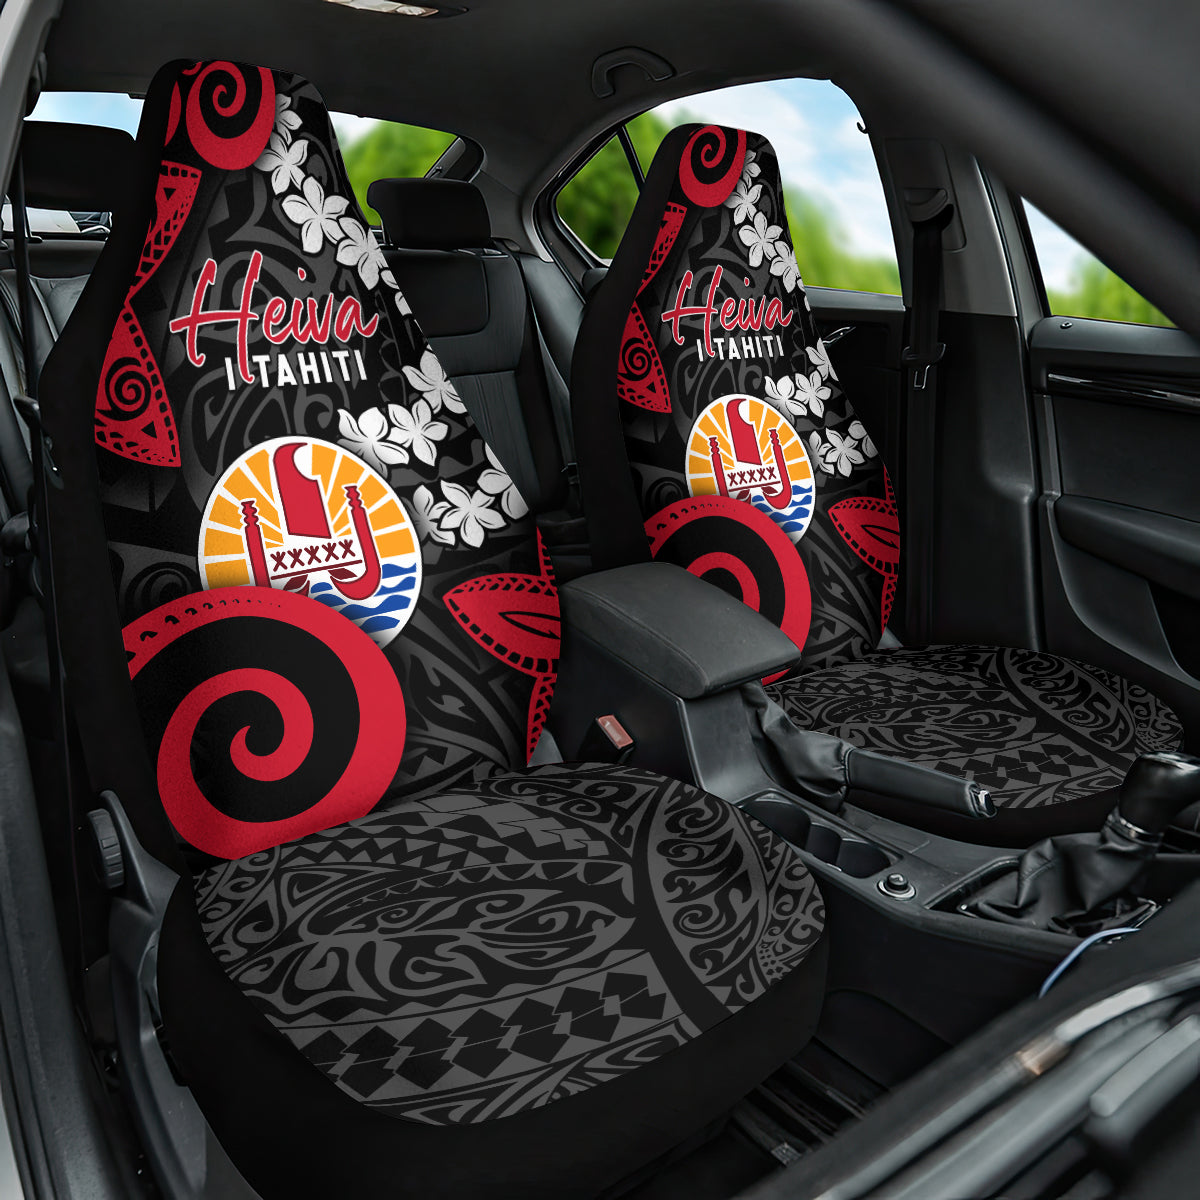 Tahiti Heiva Festival Car Seat Cover Floral Pattern With Coat Of Arms